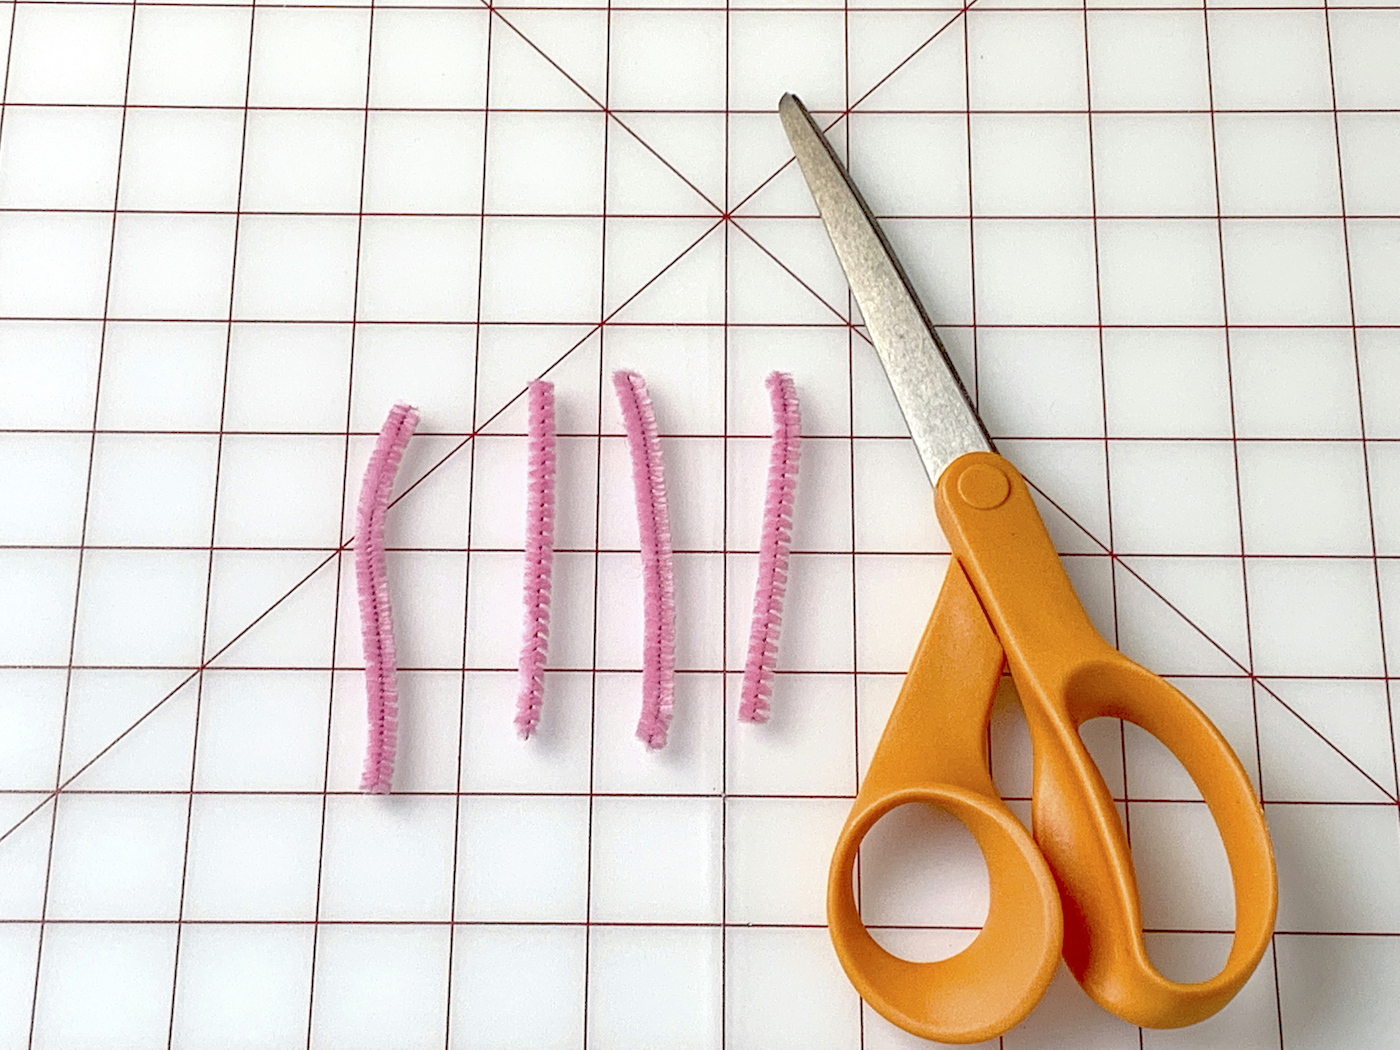 Scissors next to a pink pipe cleaner cut into four pieces